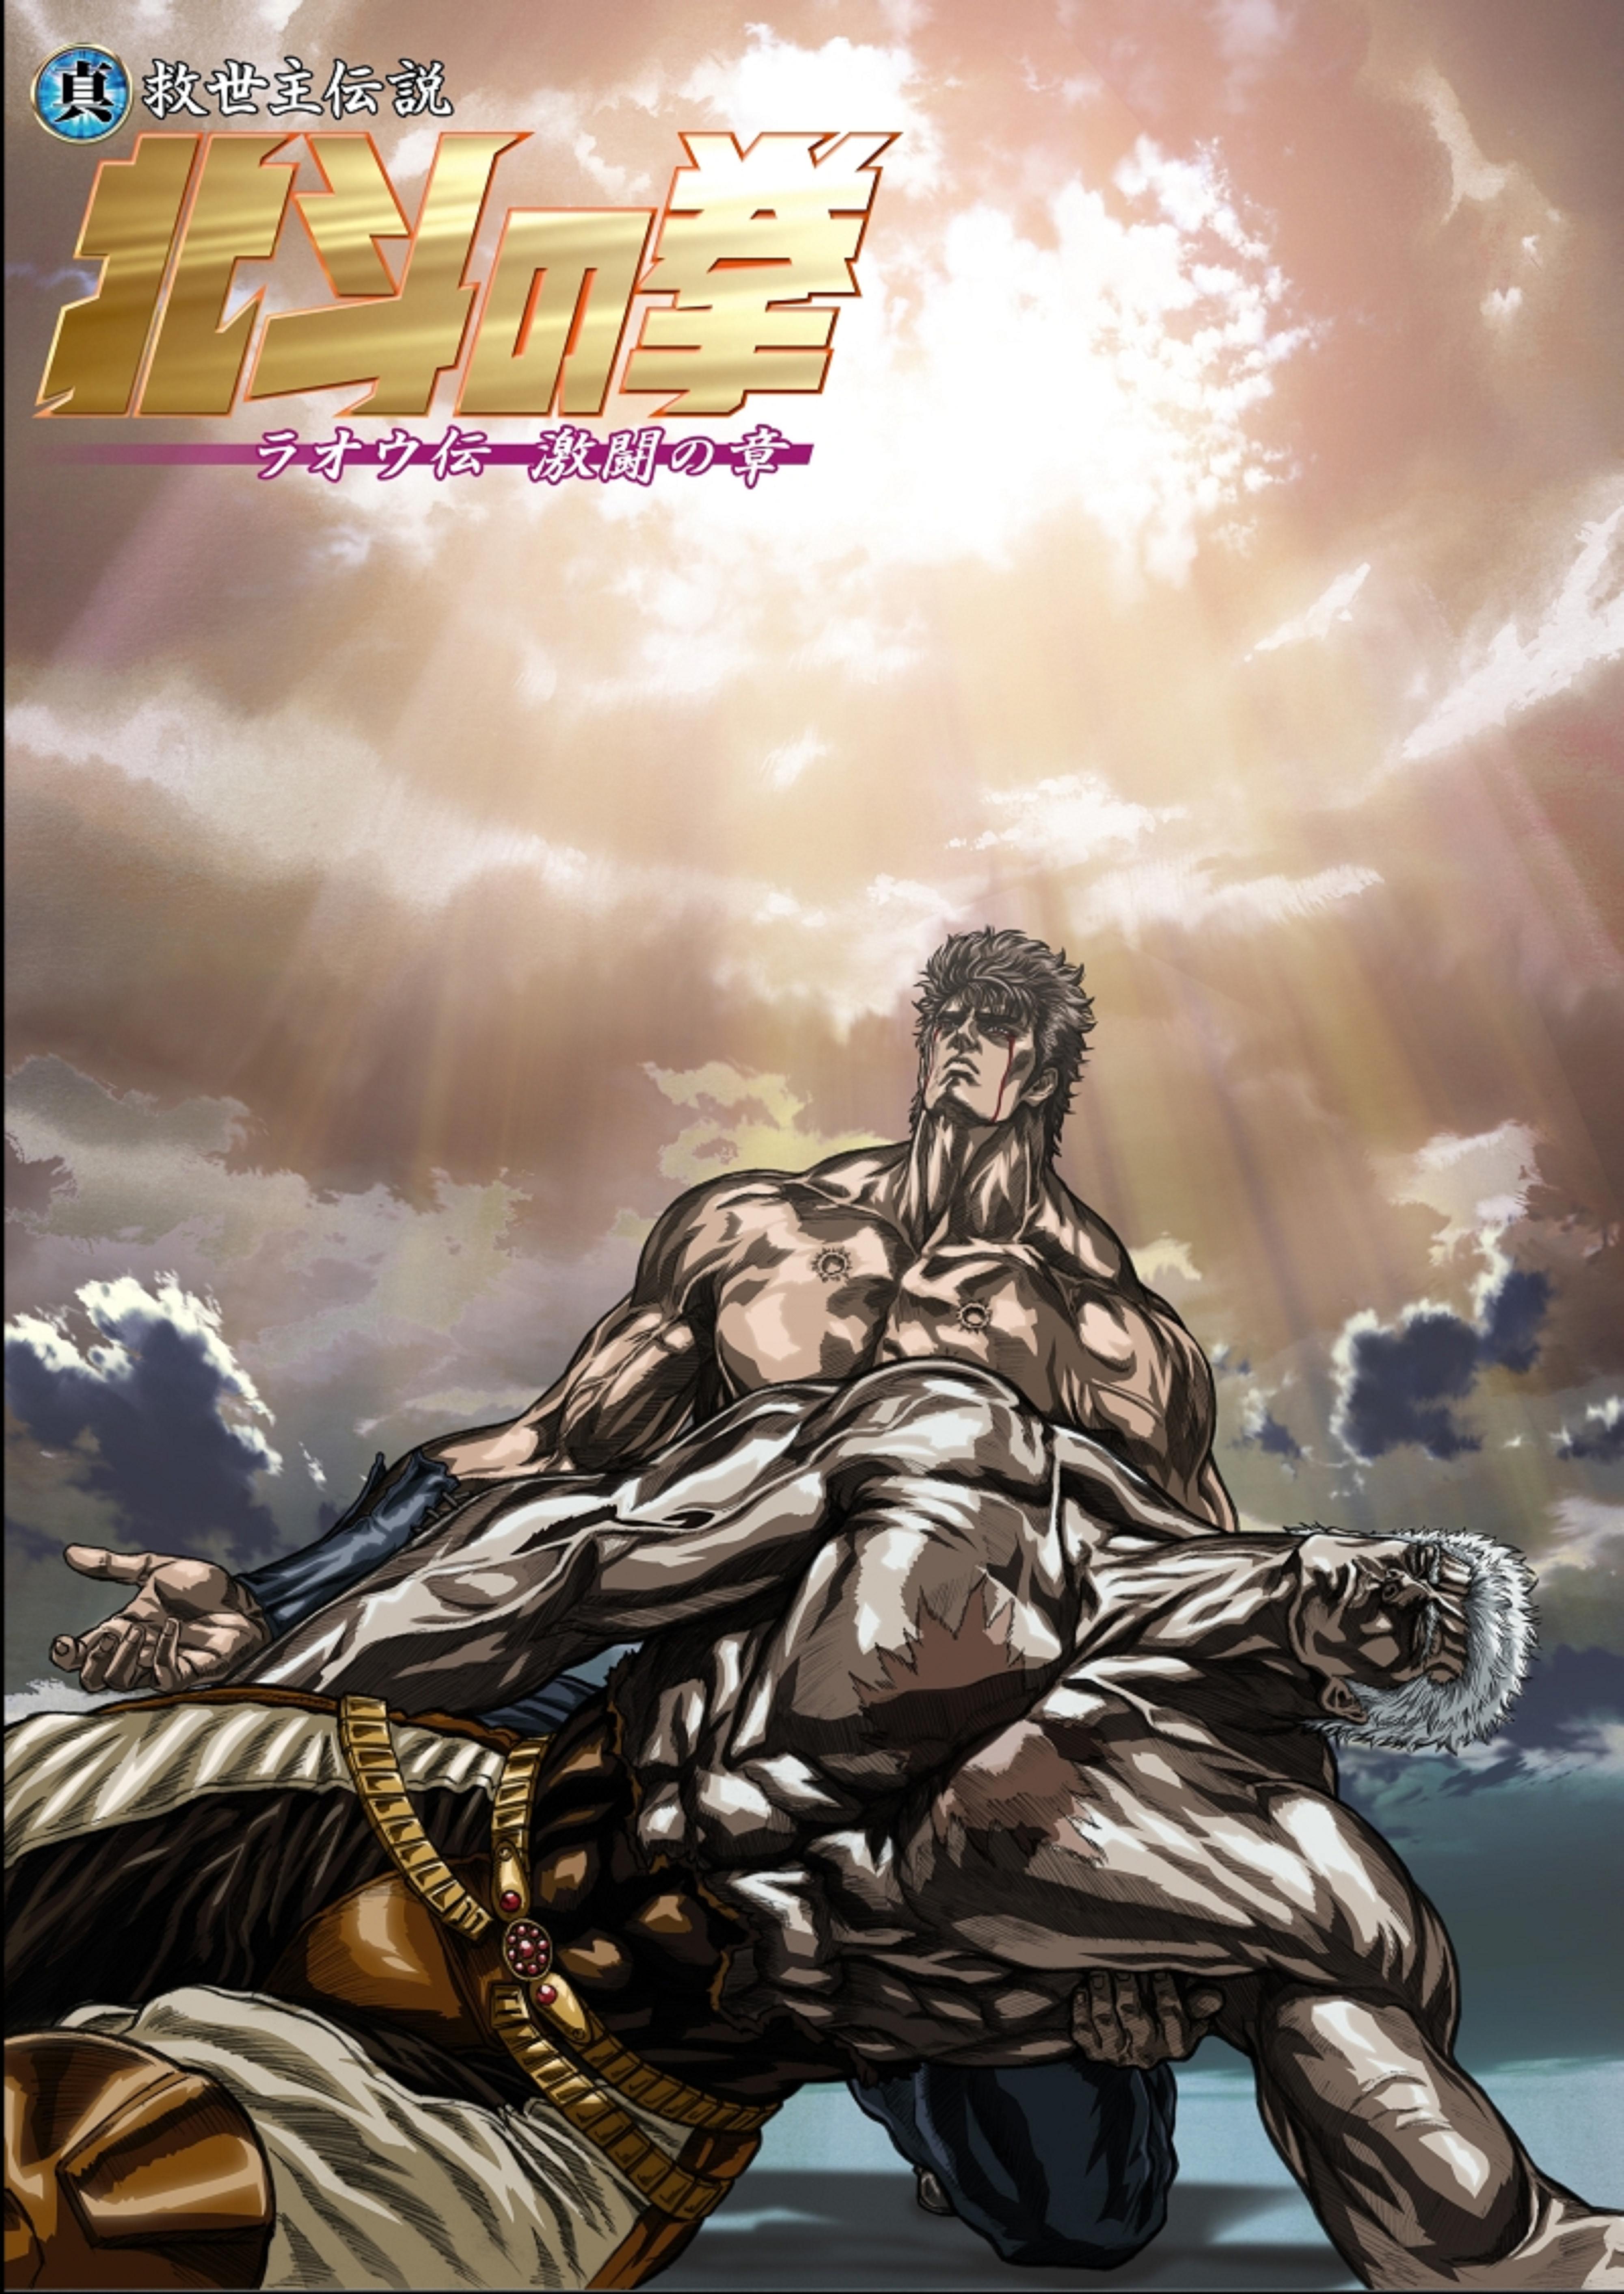 Fist of the North Star: Legend of Raoh - Chapter of Fierce Fighting